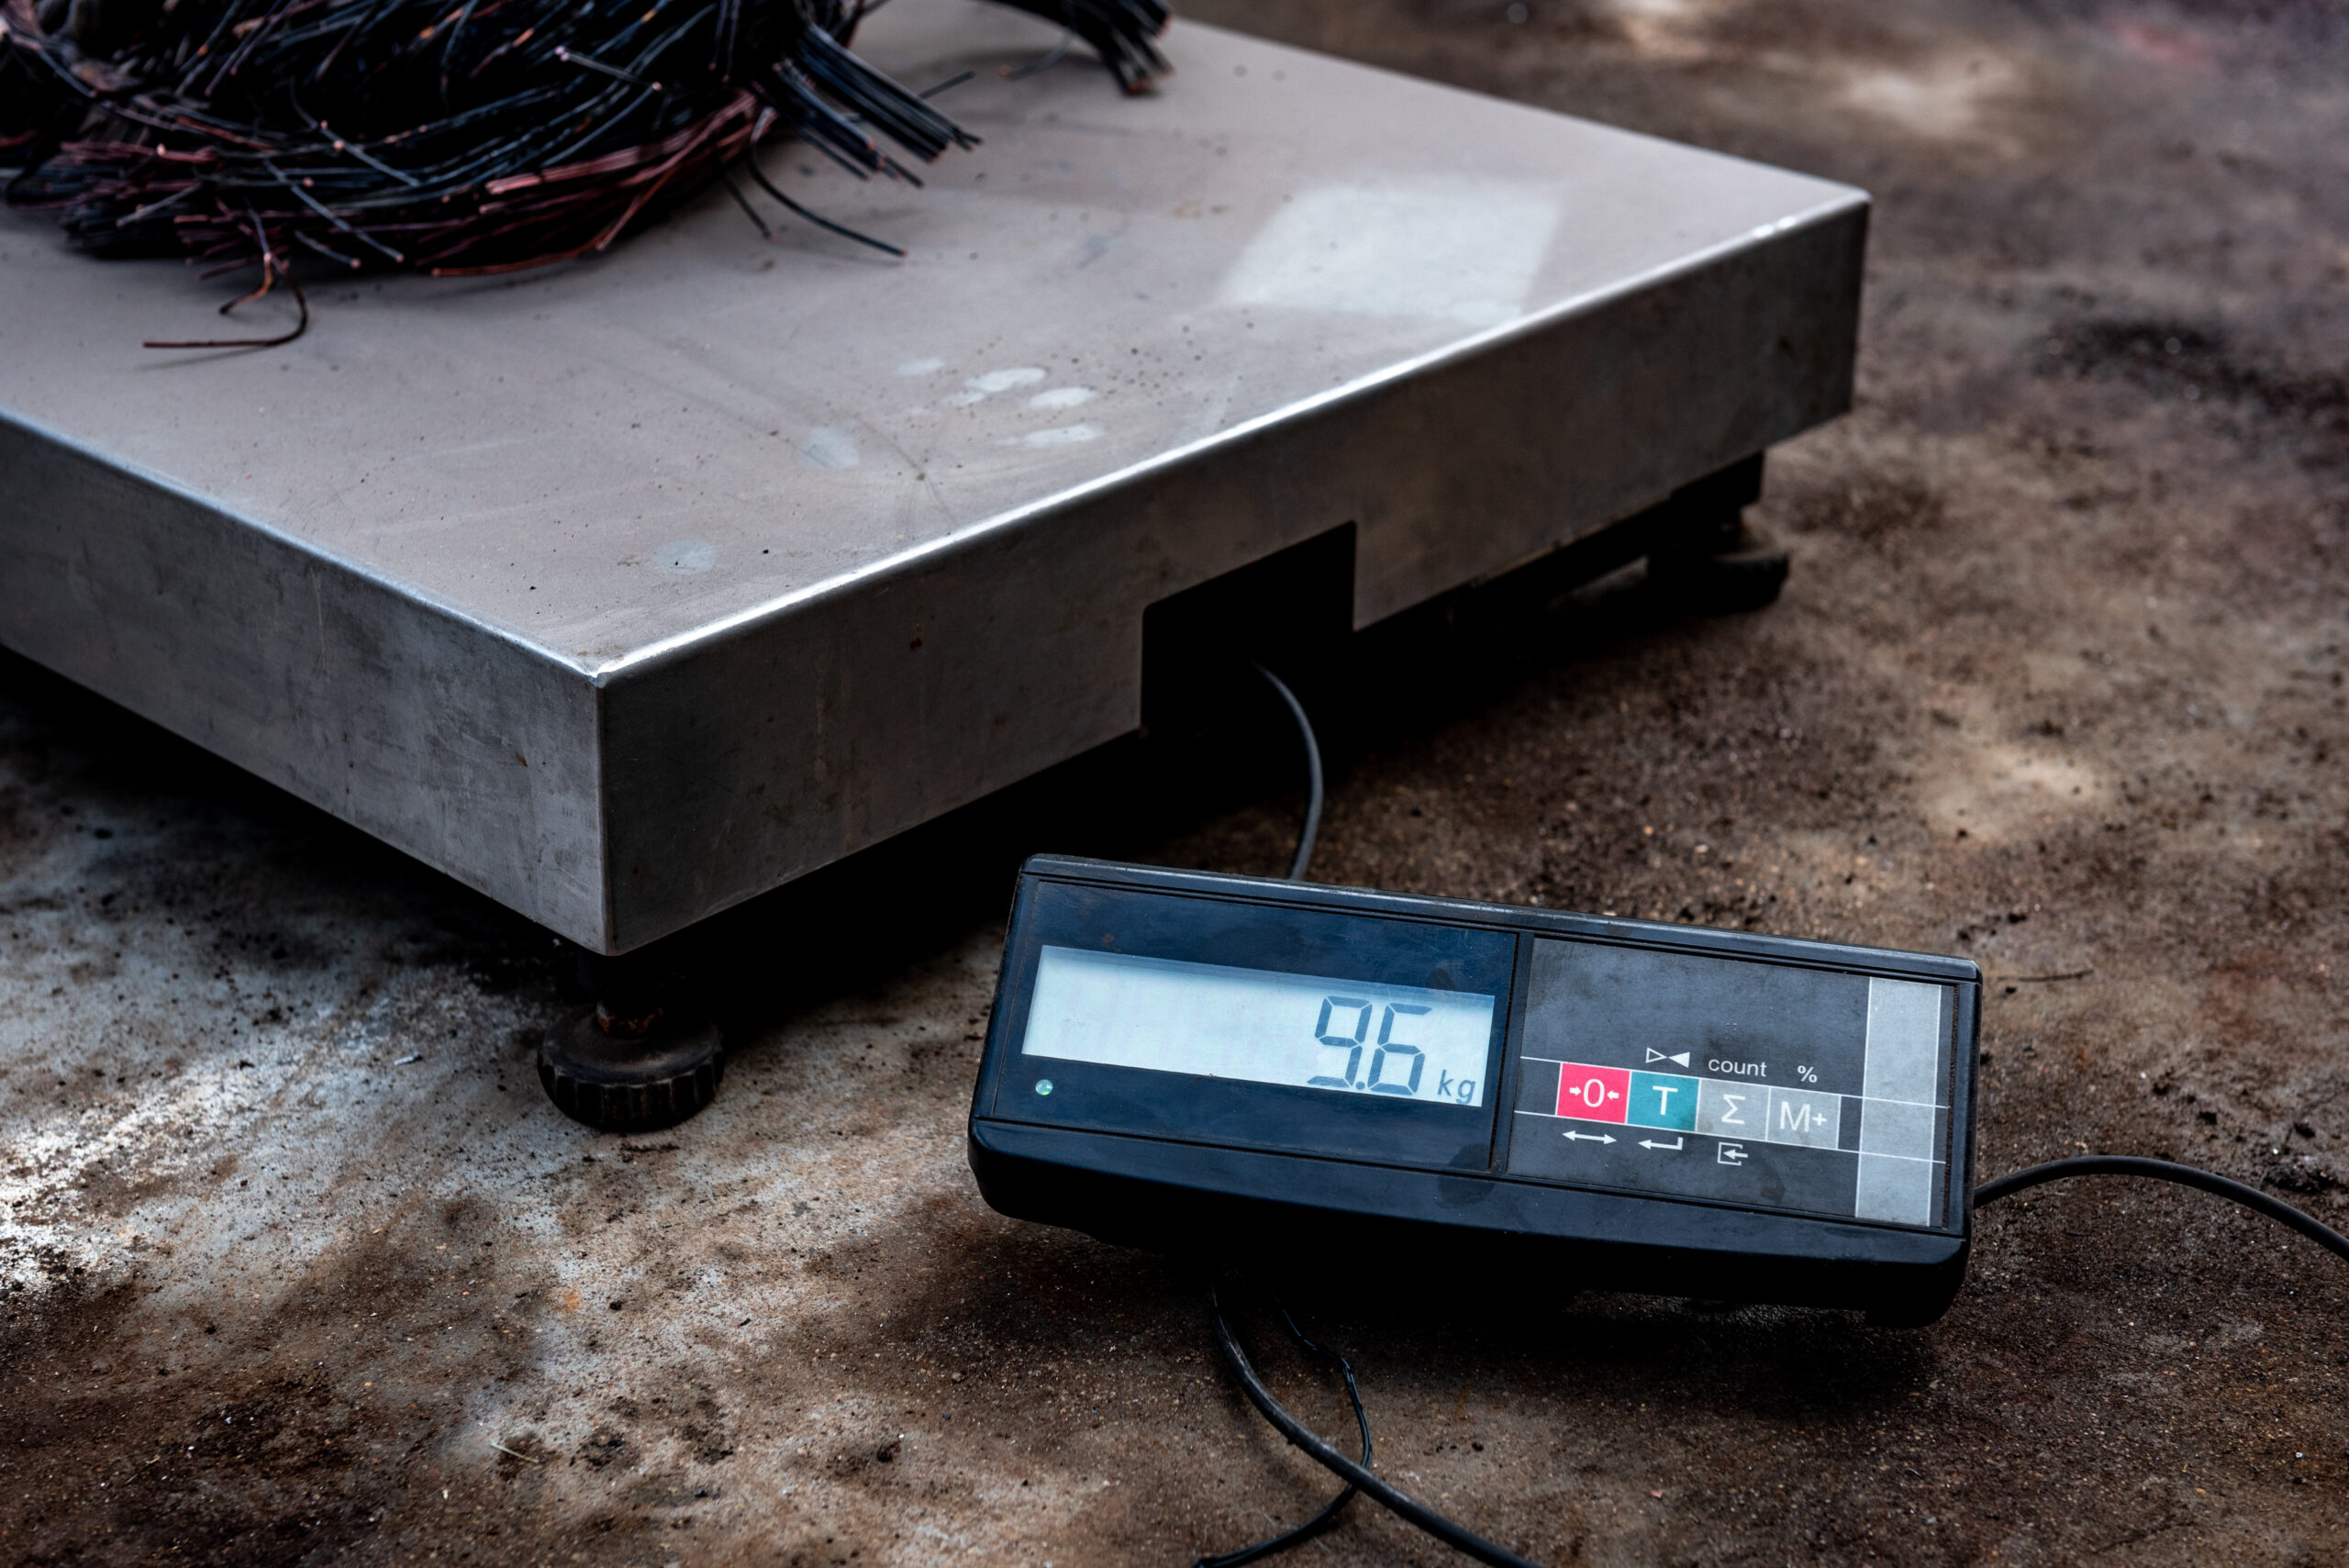 stainless steel platform scale on the ground weighing products with separate digital screen displaying a weight of 9.6 kilograms